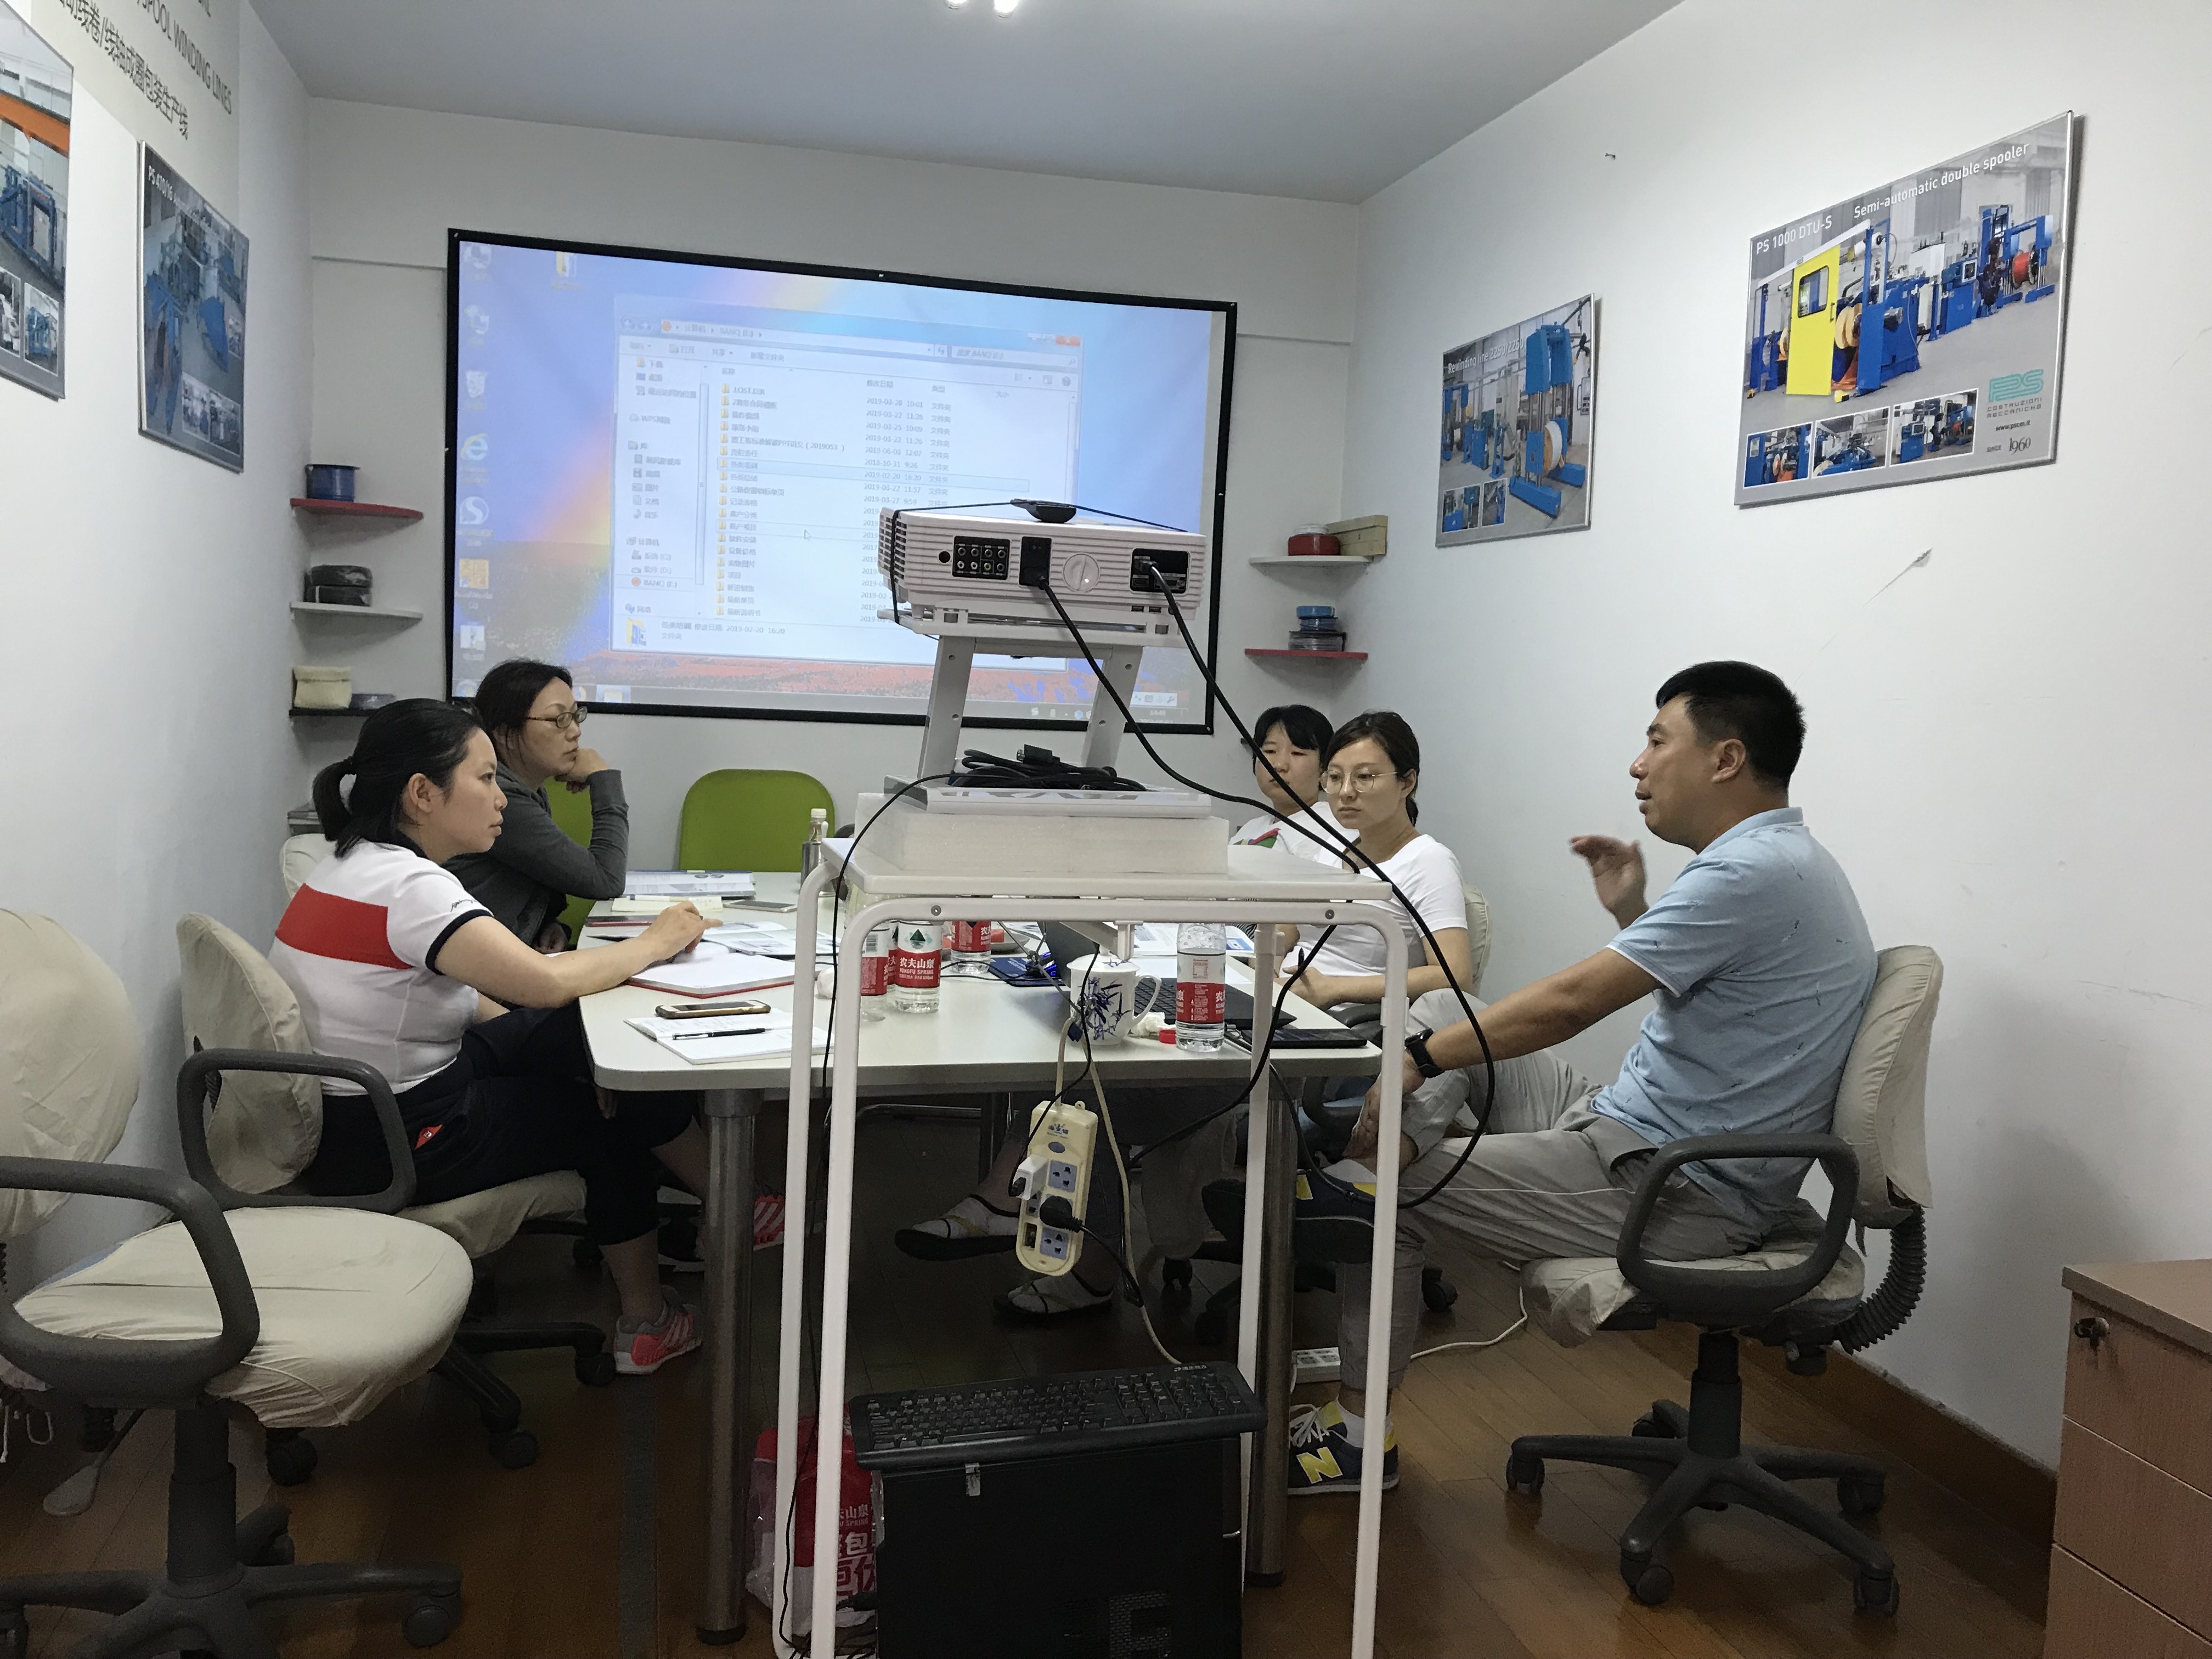 August 26, 2019 ordinary training for new product knowledge in TBT company